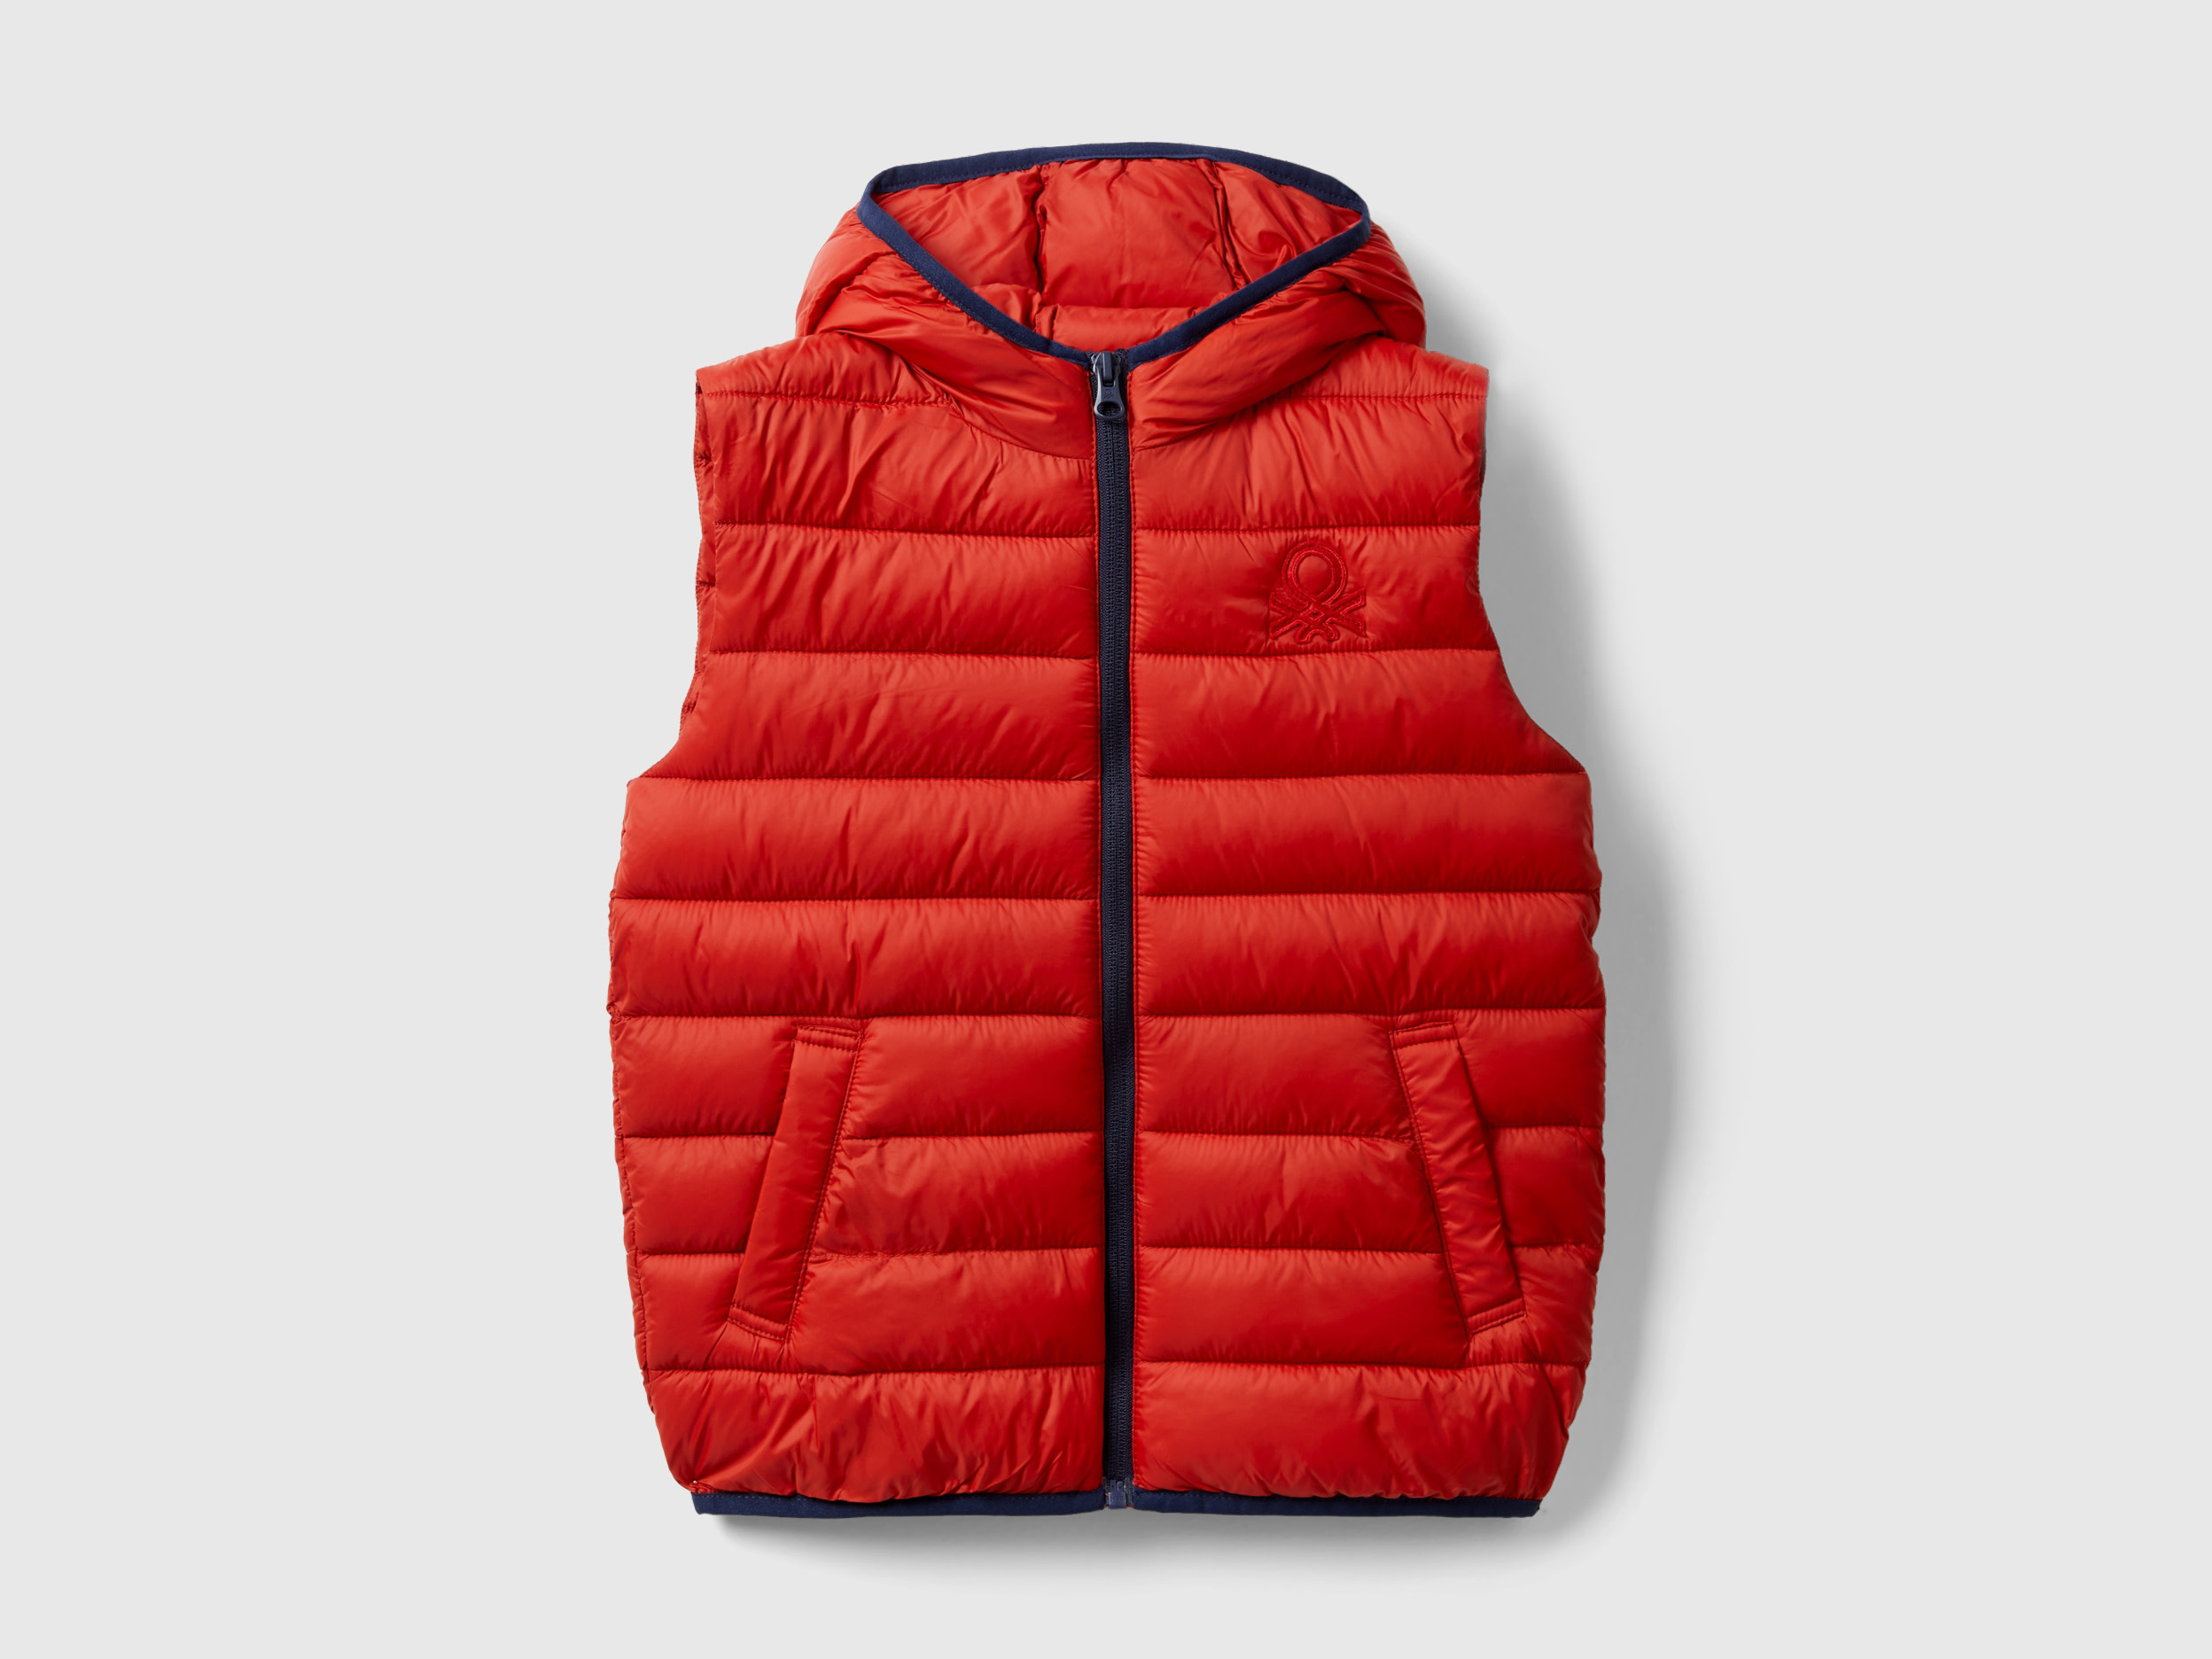 Benetton, Padded Jacket With Hood, size 2XL, Brick Red, Kids